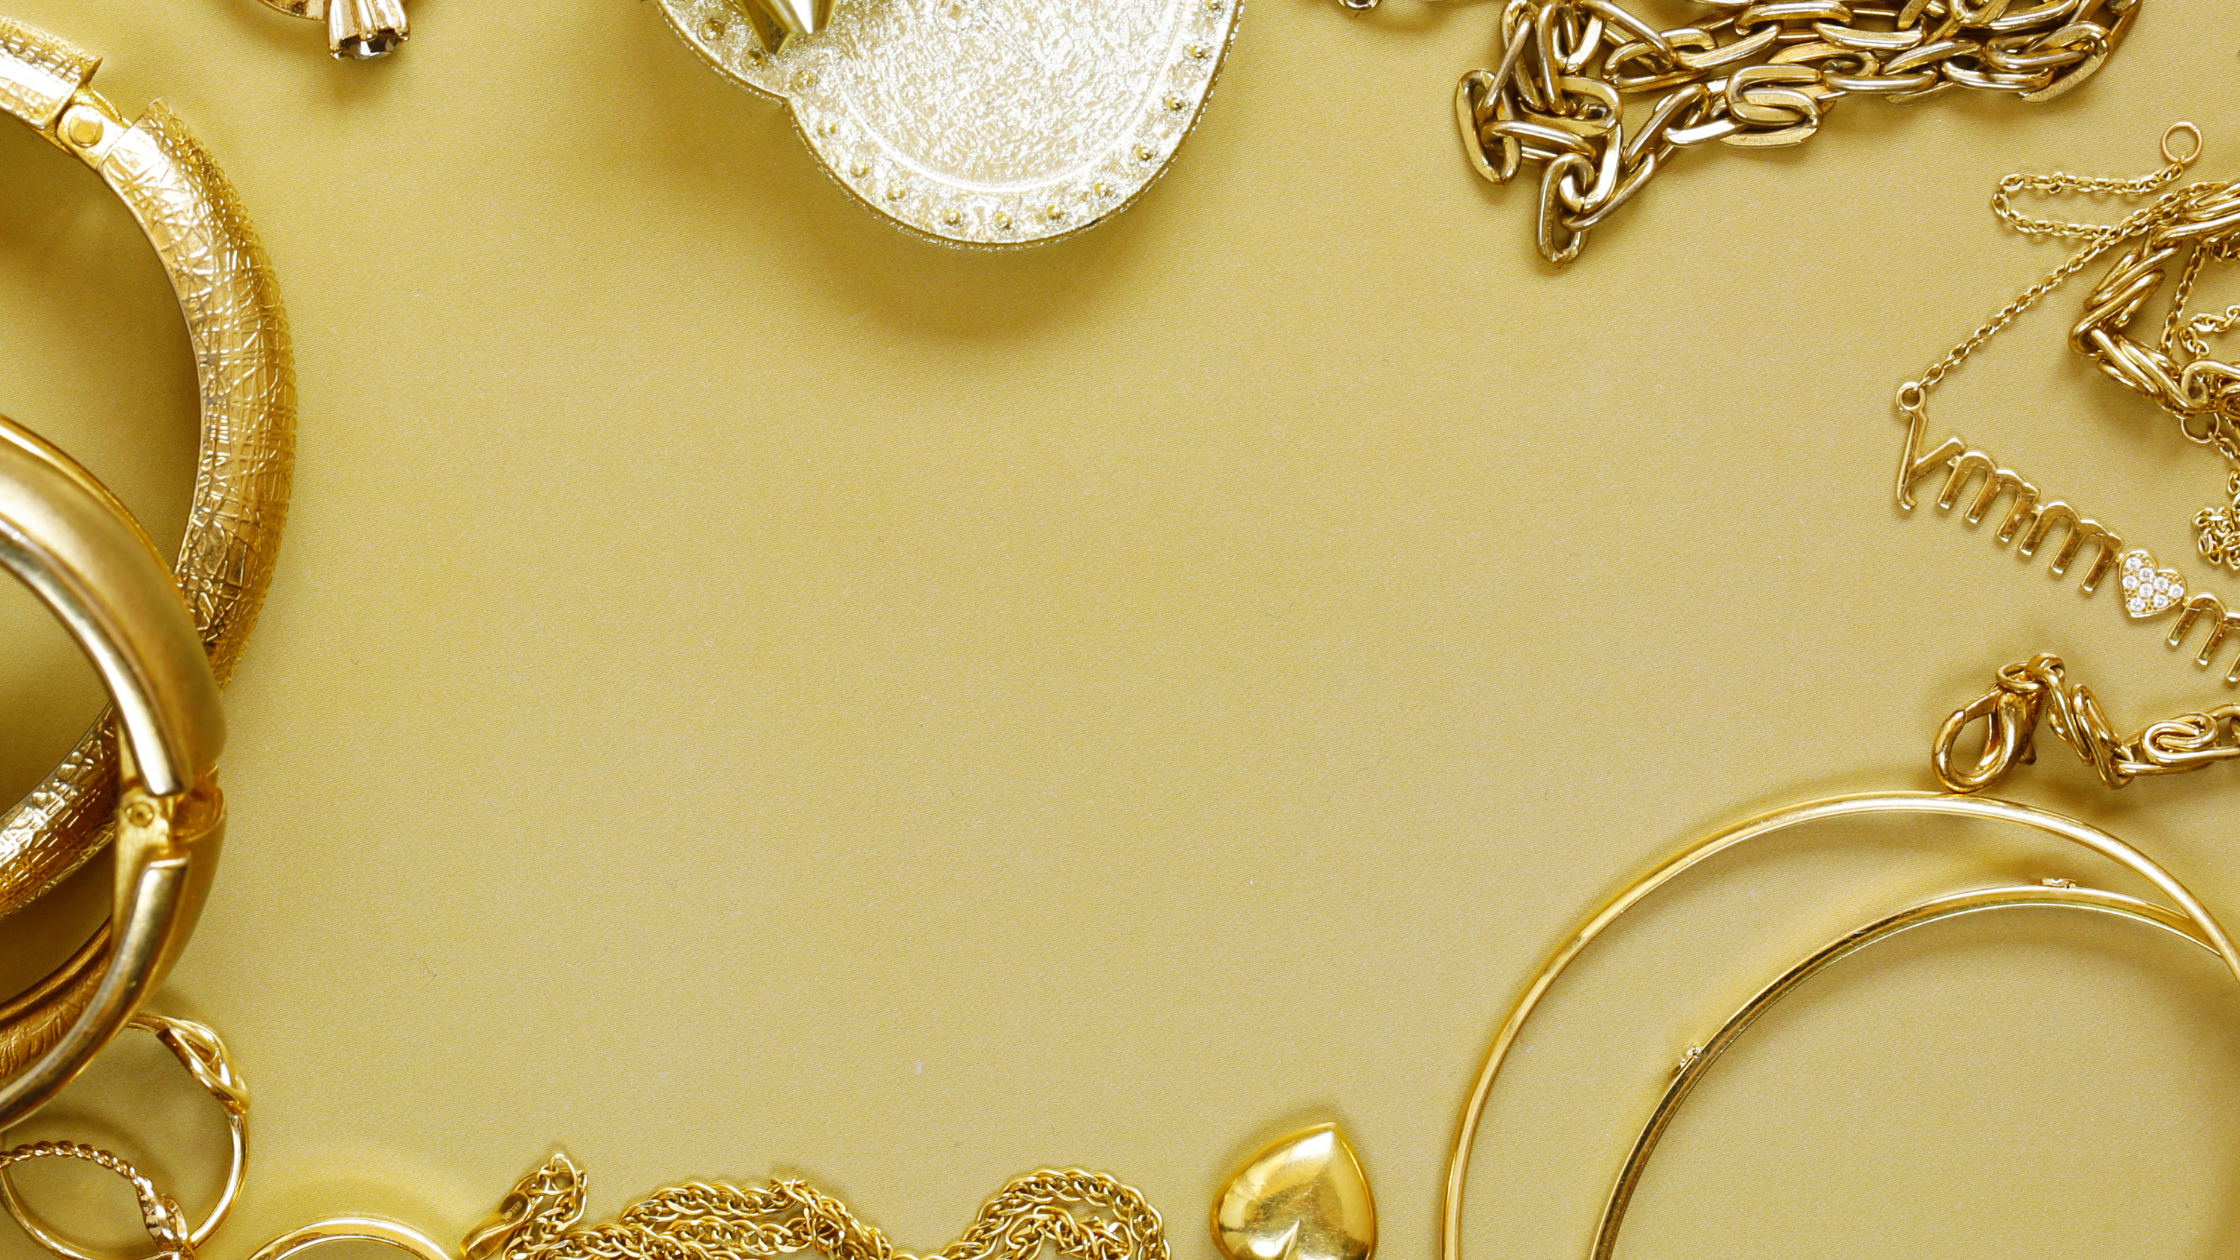 What Is Gold Filled Jewelry?